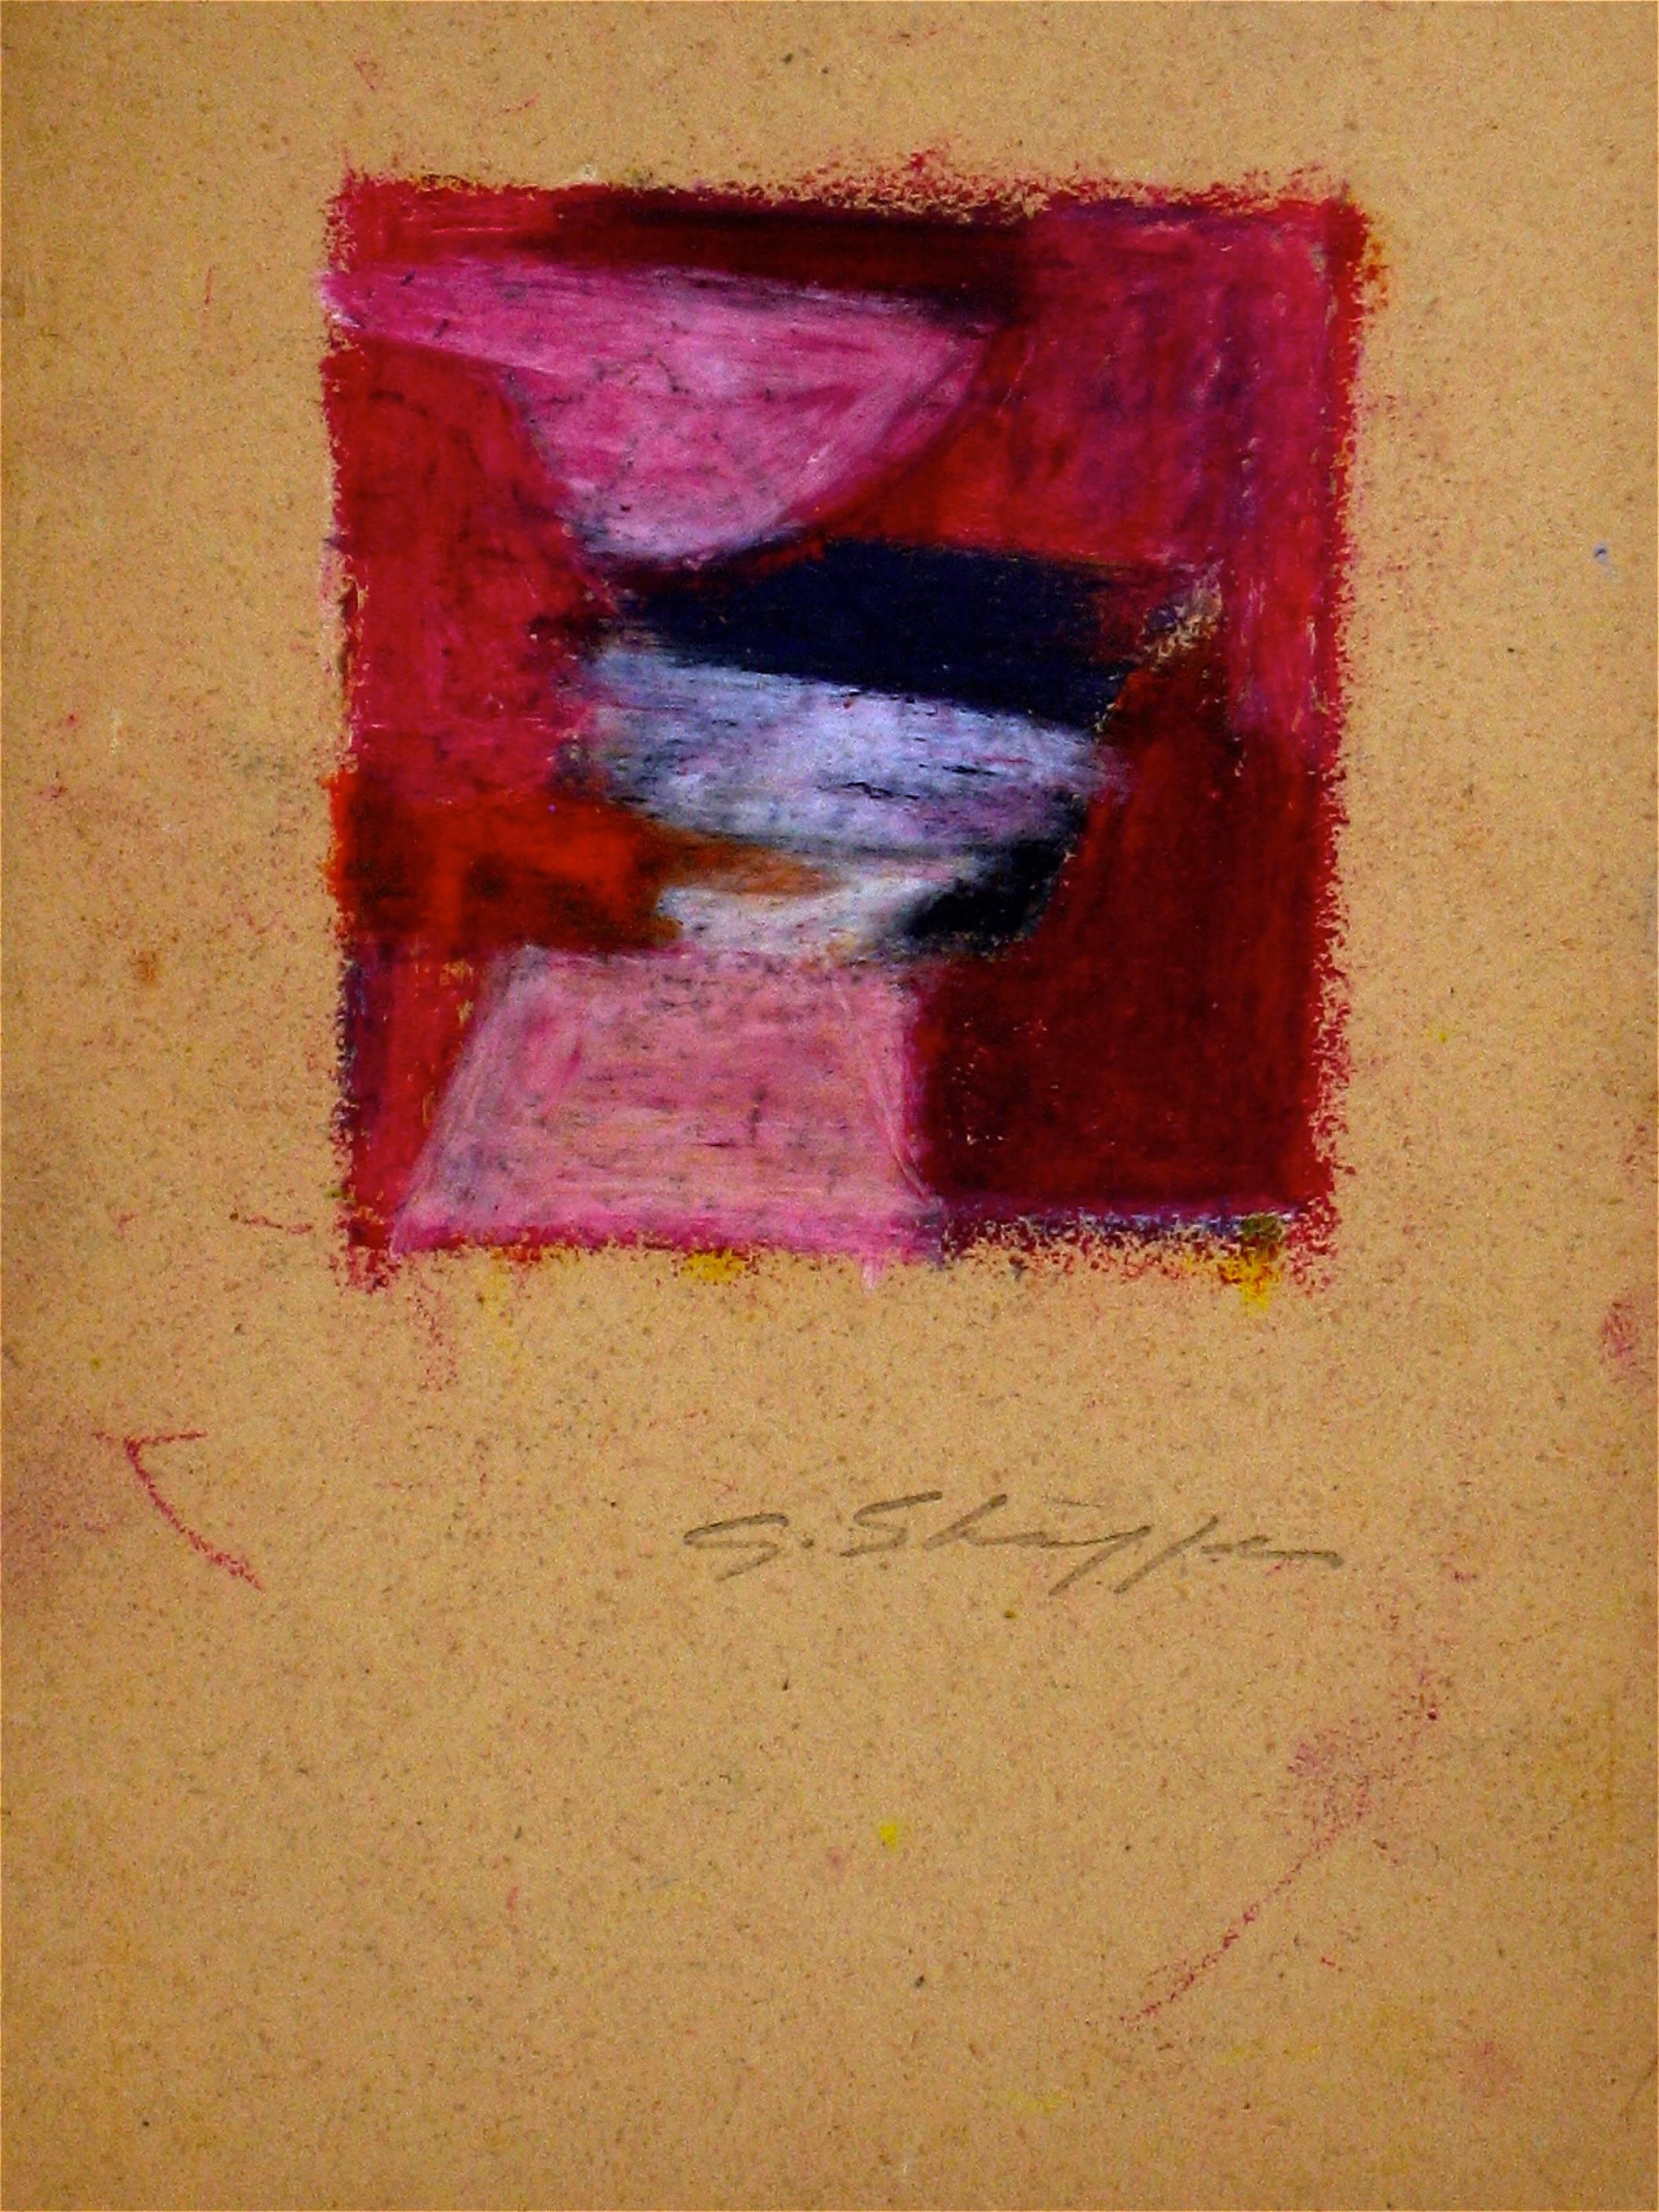 Petite Abstract Expressionist Study in Red and Pink, Pastel on Paper, 1958 - Brown Abstract Drawing by Gary Lee Shaffer